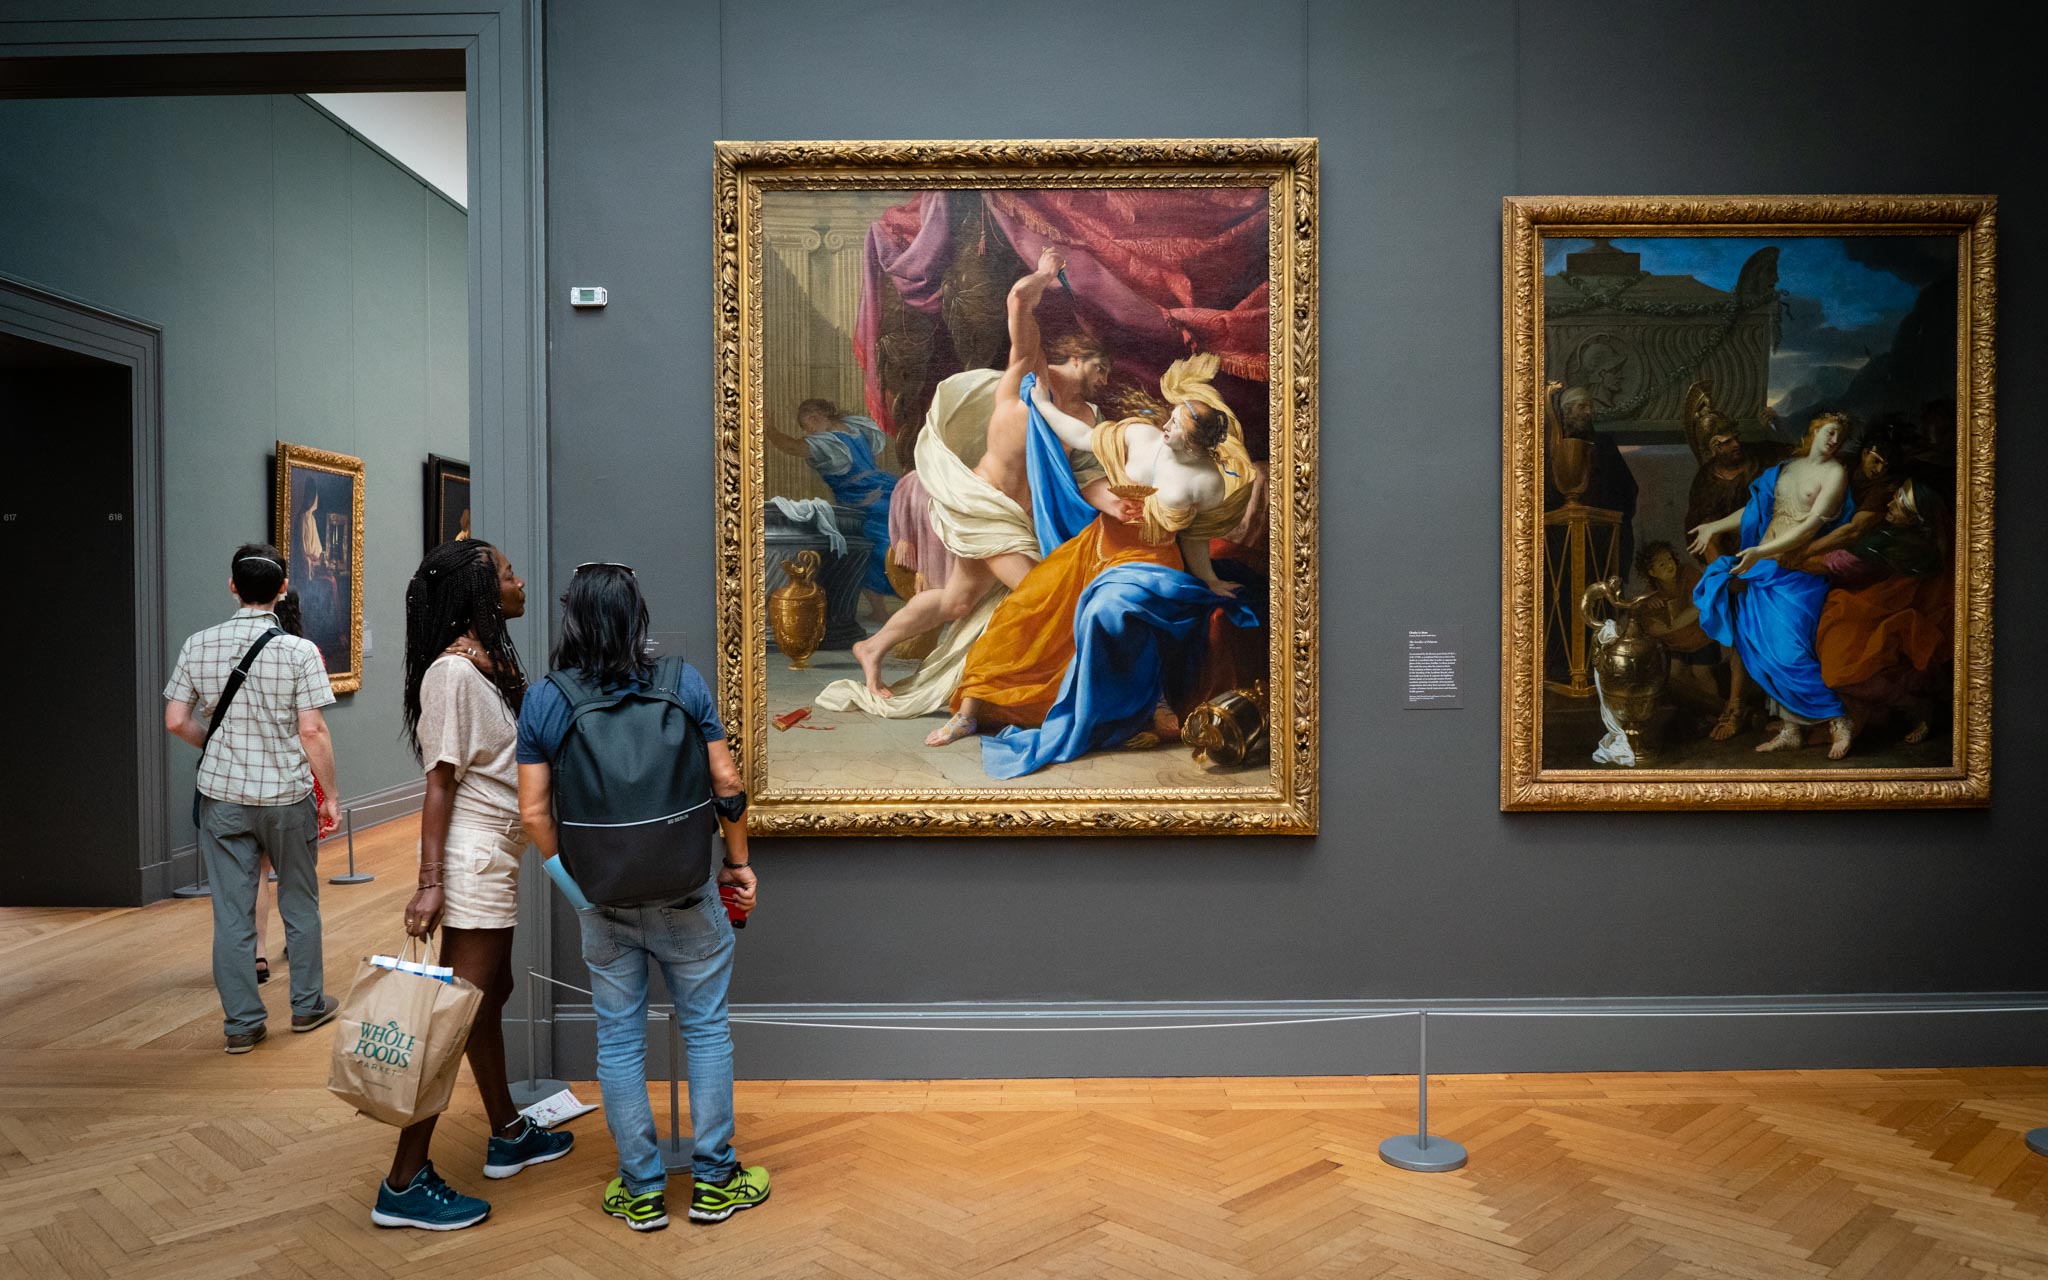 The painting at center, 'The Rape of Tamar,' was sold by a Jewish family under duress in Germany in the 1930s. Seen at The Metropolitan Museum of Art in New York, August 20, 2022. (Luke Tress/Times of Israel)